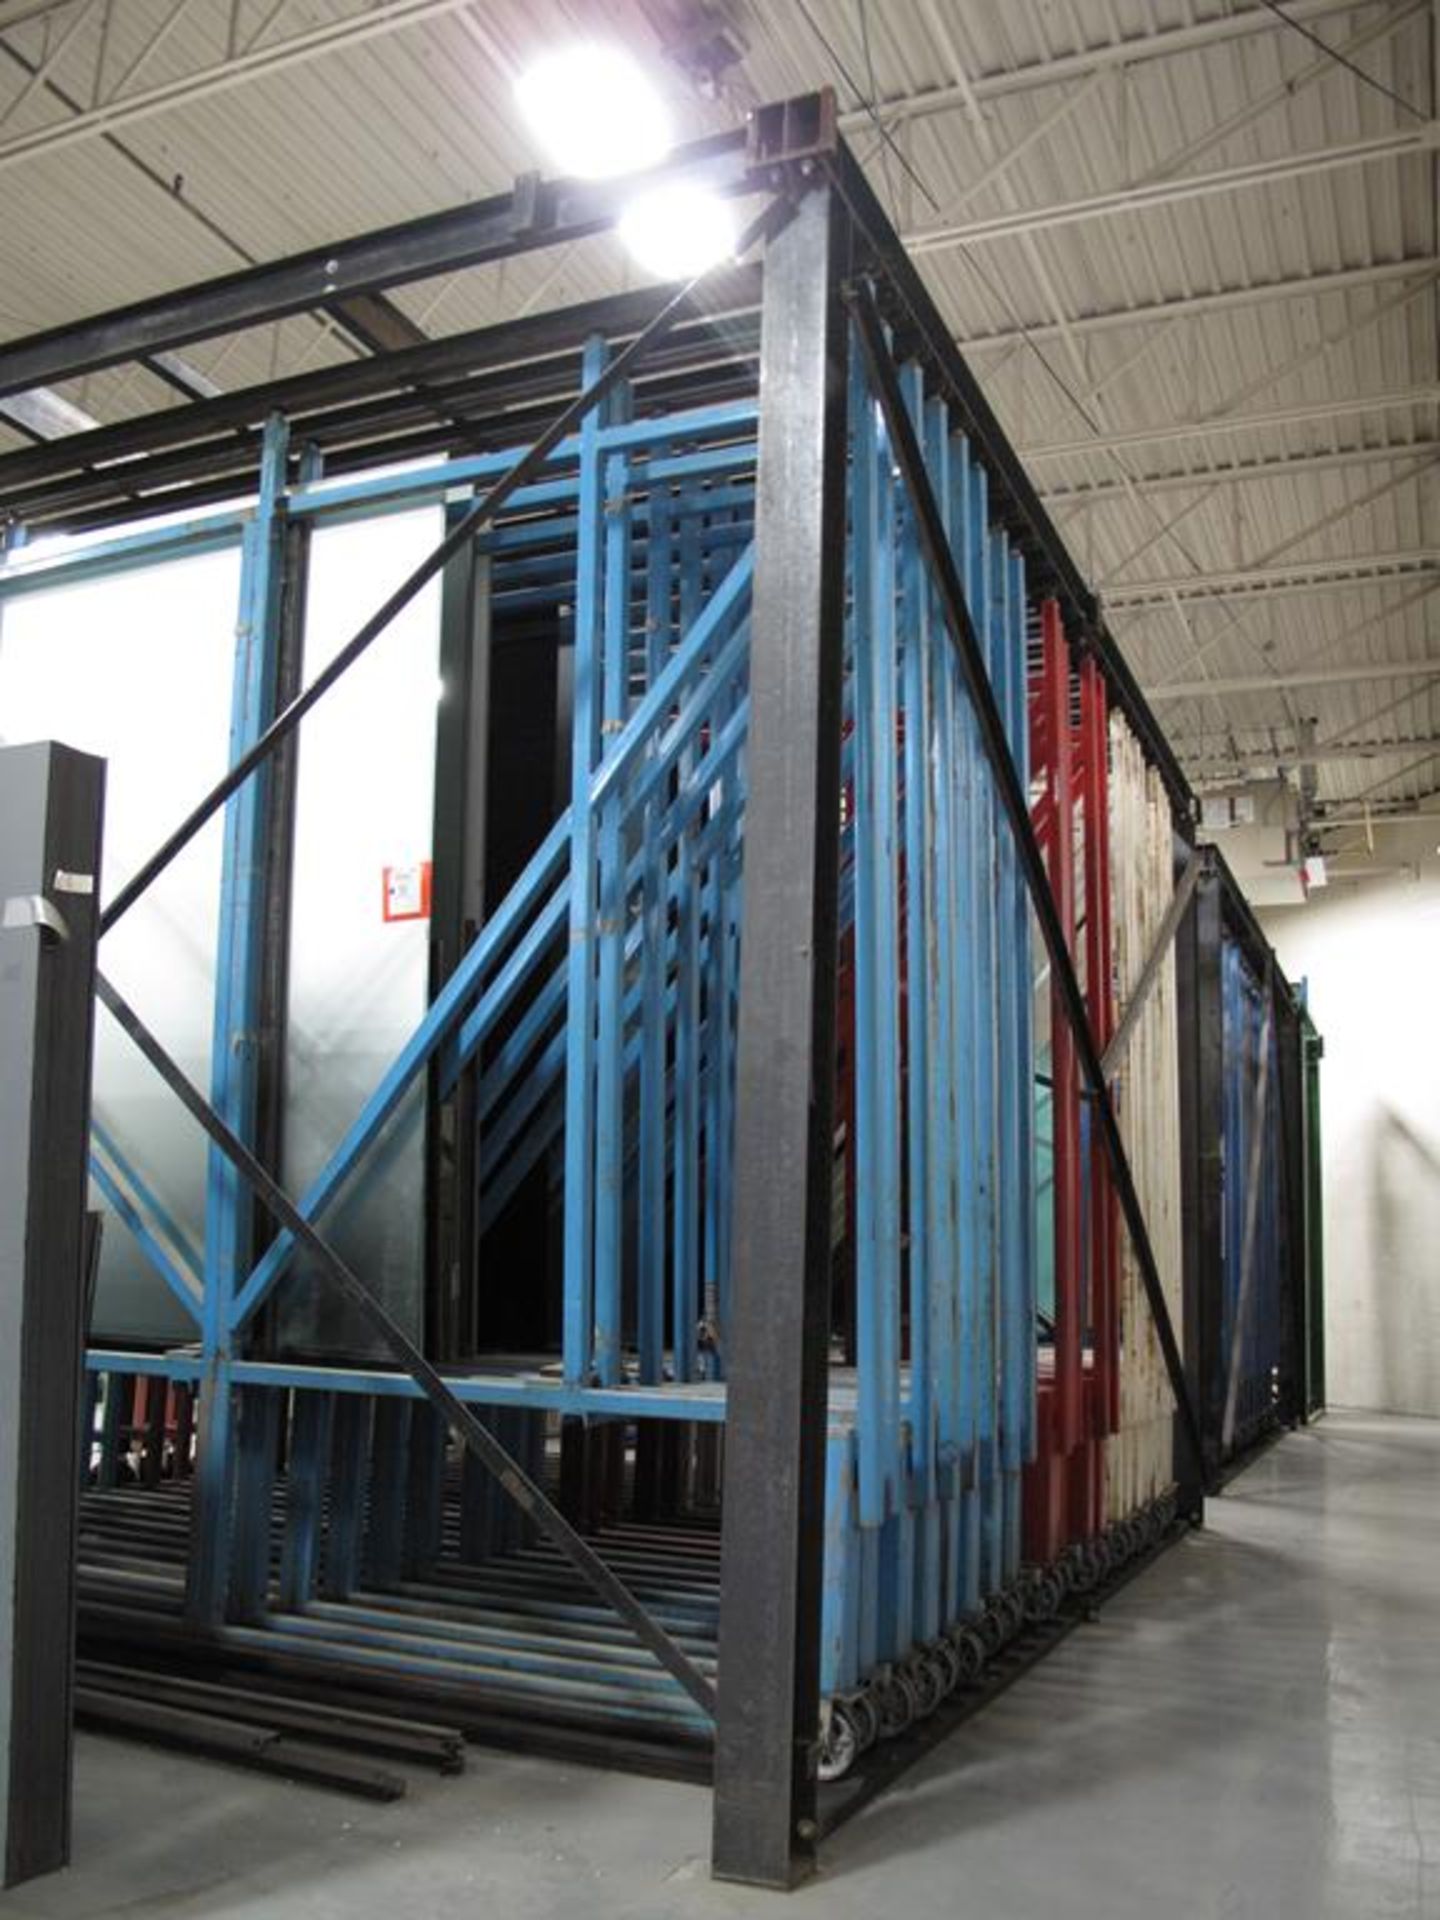 BROMER, 24 DRAWER, GLASS STORAGE SYSTEM, MAX GLASS SIZE 96" T X 140" LONG, MAX CAPACITY 4500 LBS. - Image 4 of 5